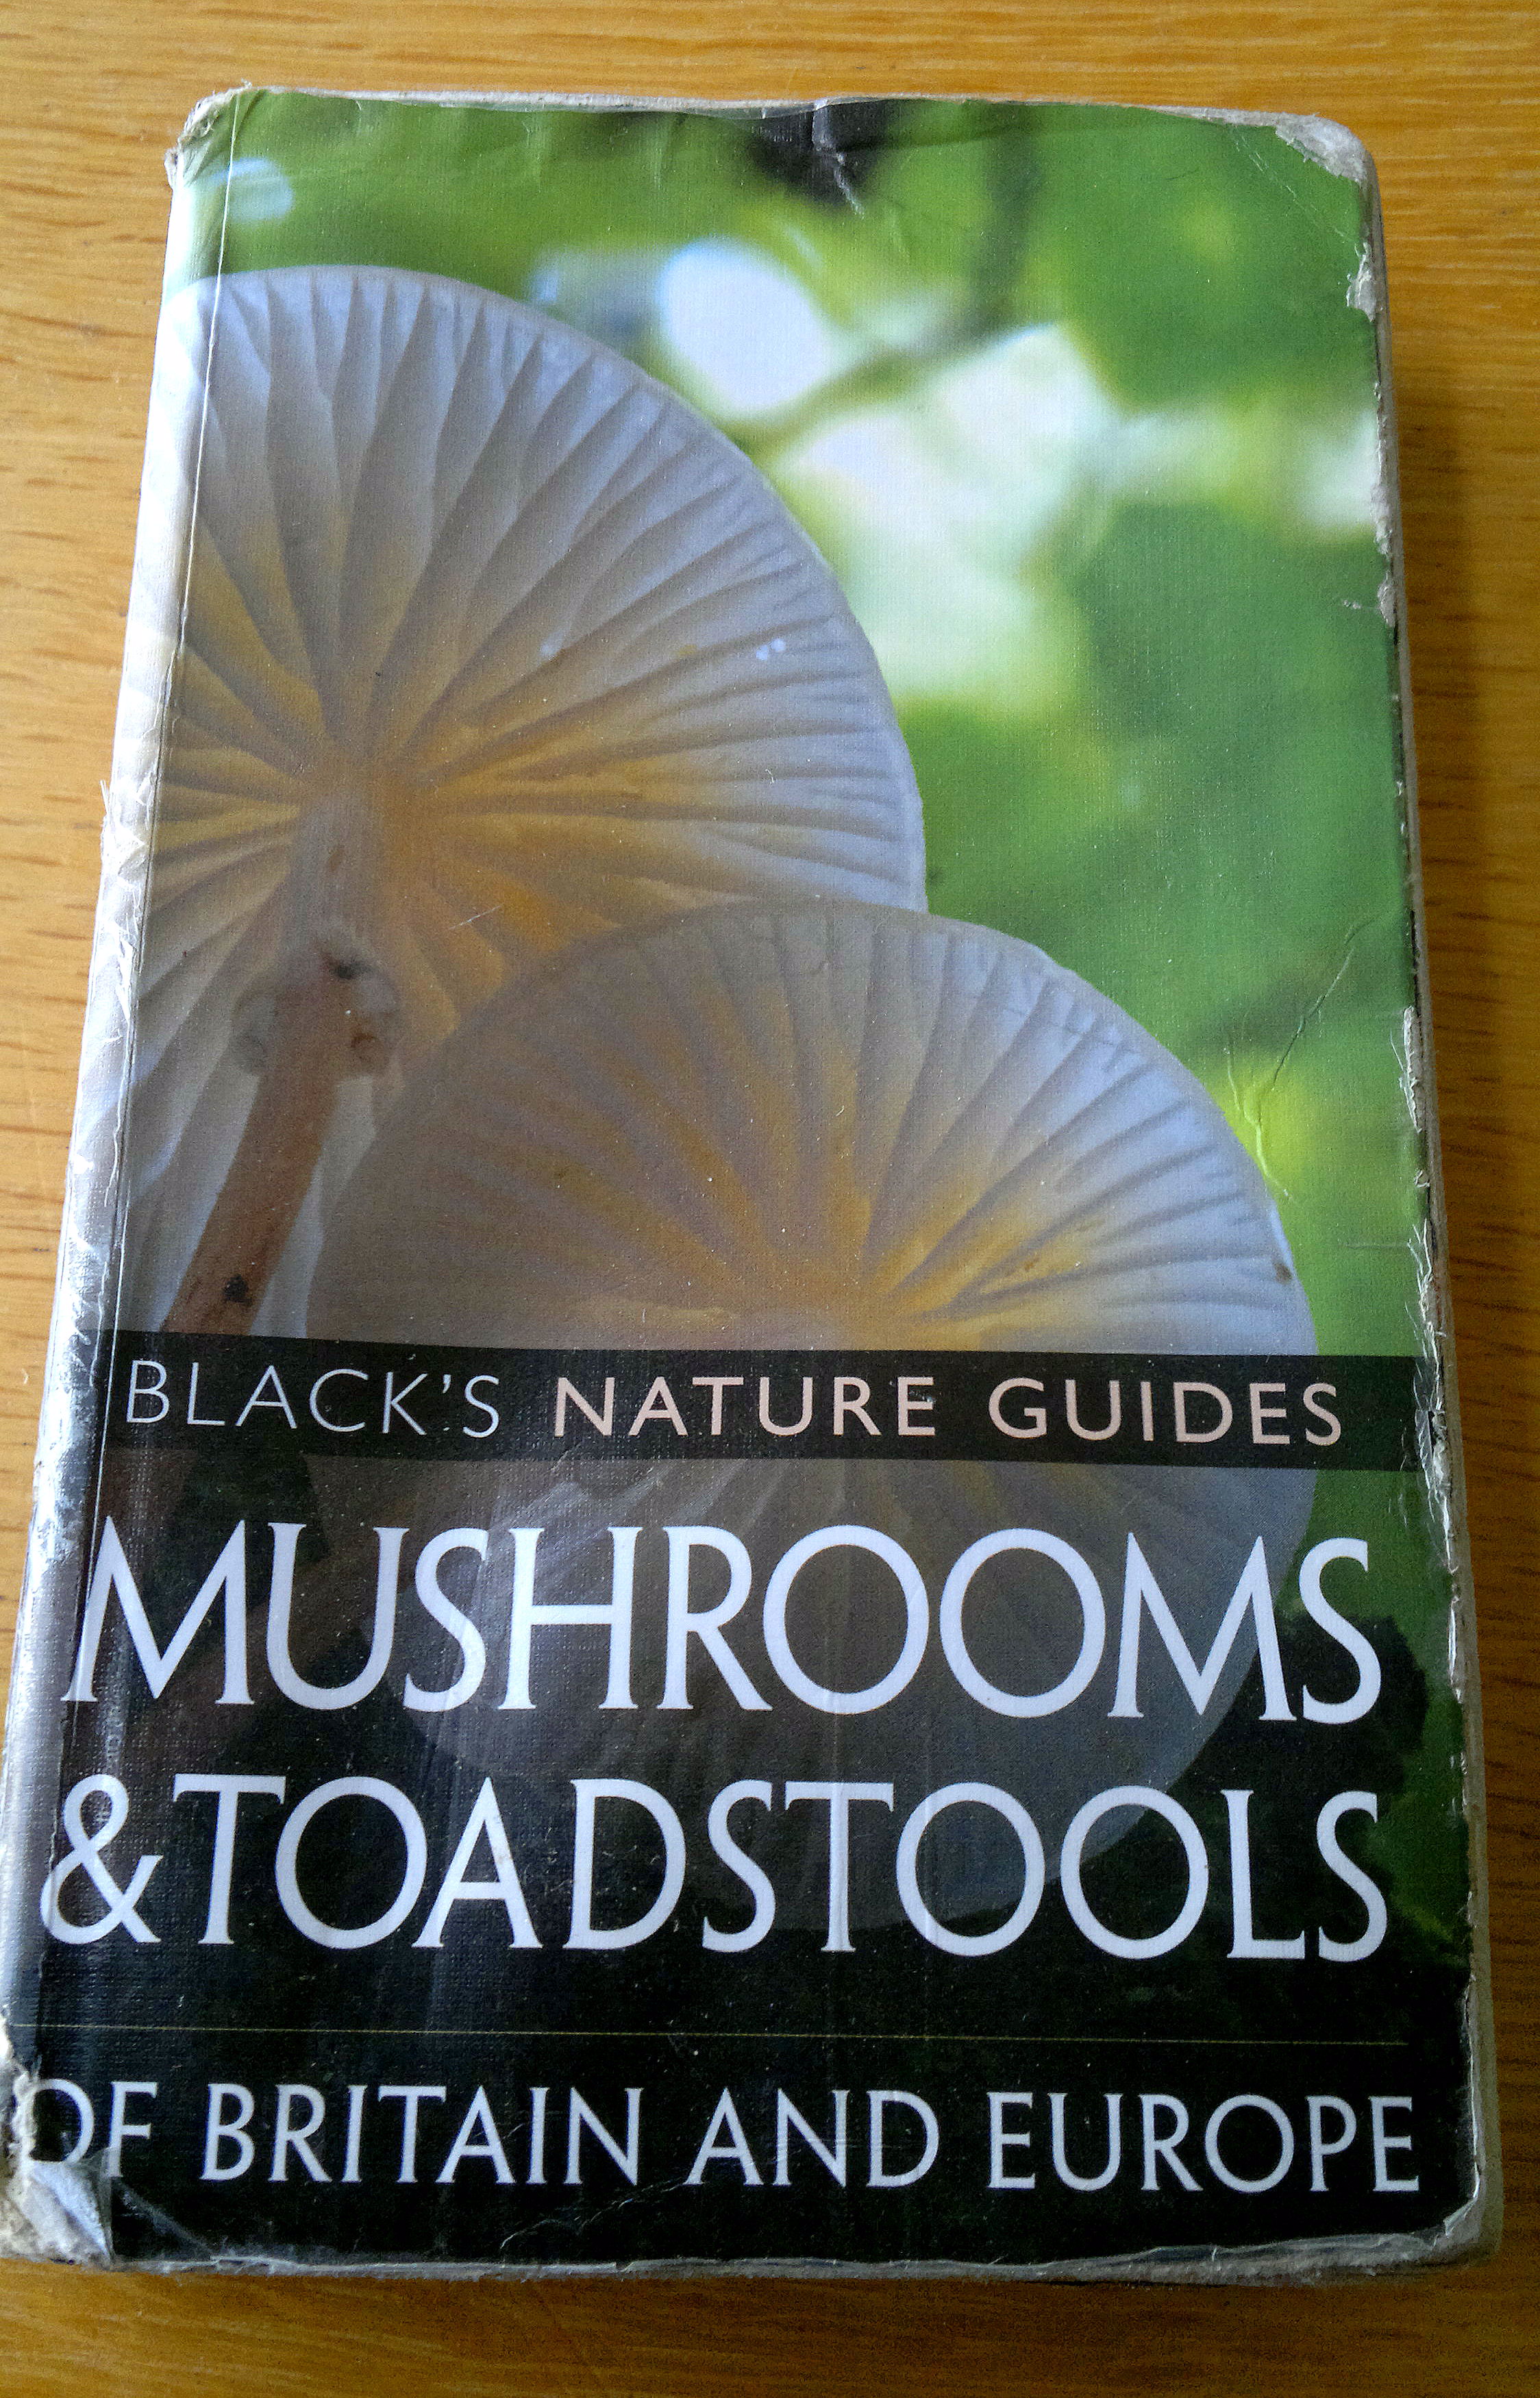 Collins Complete British Mushrooms and Toadstools The essential photograph guide to Britain’s fungi